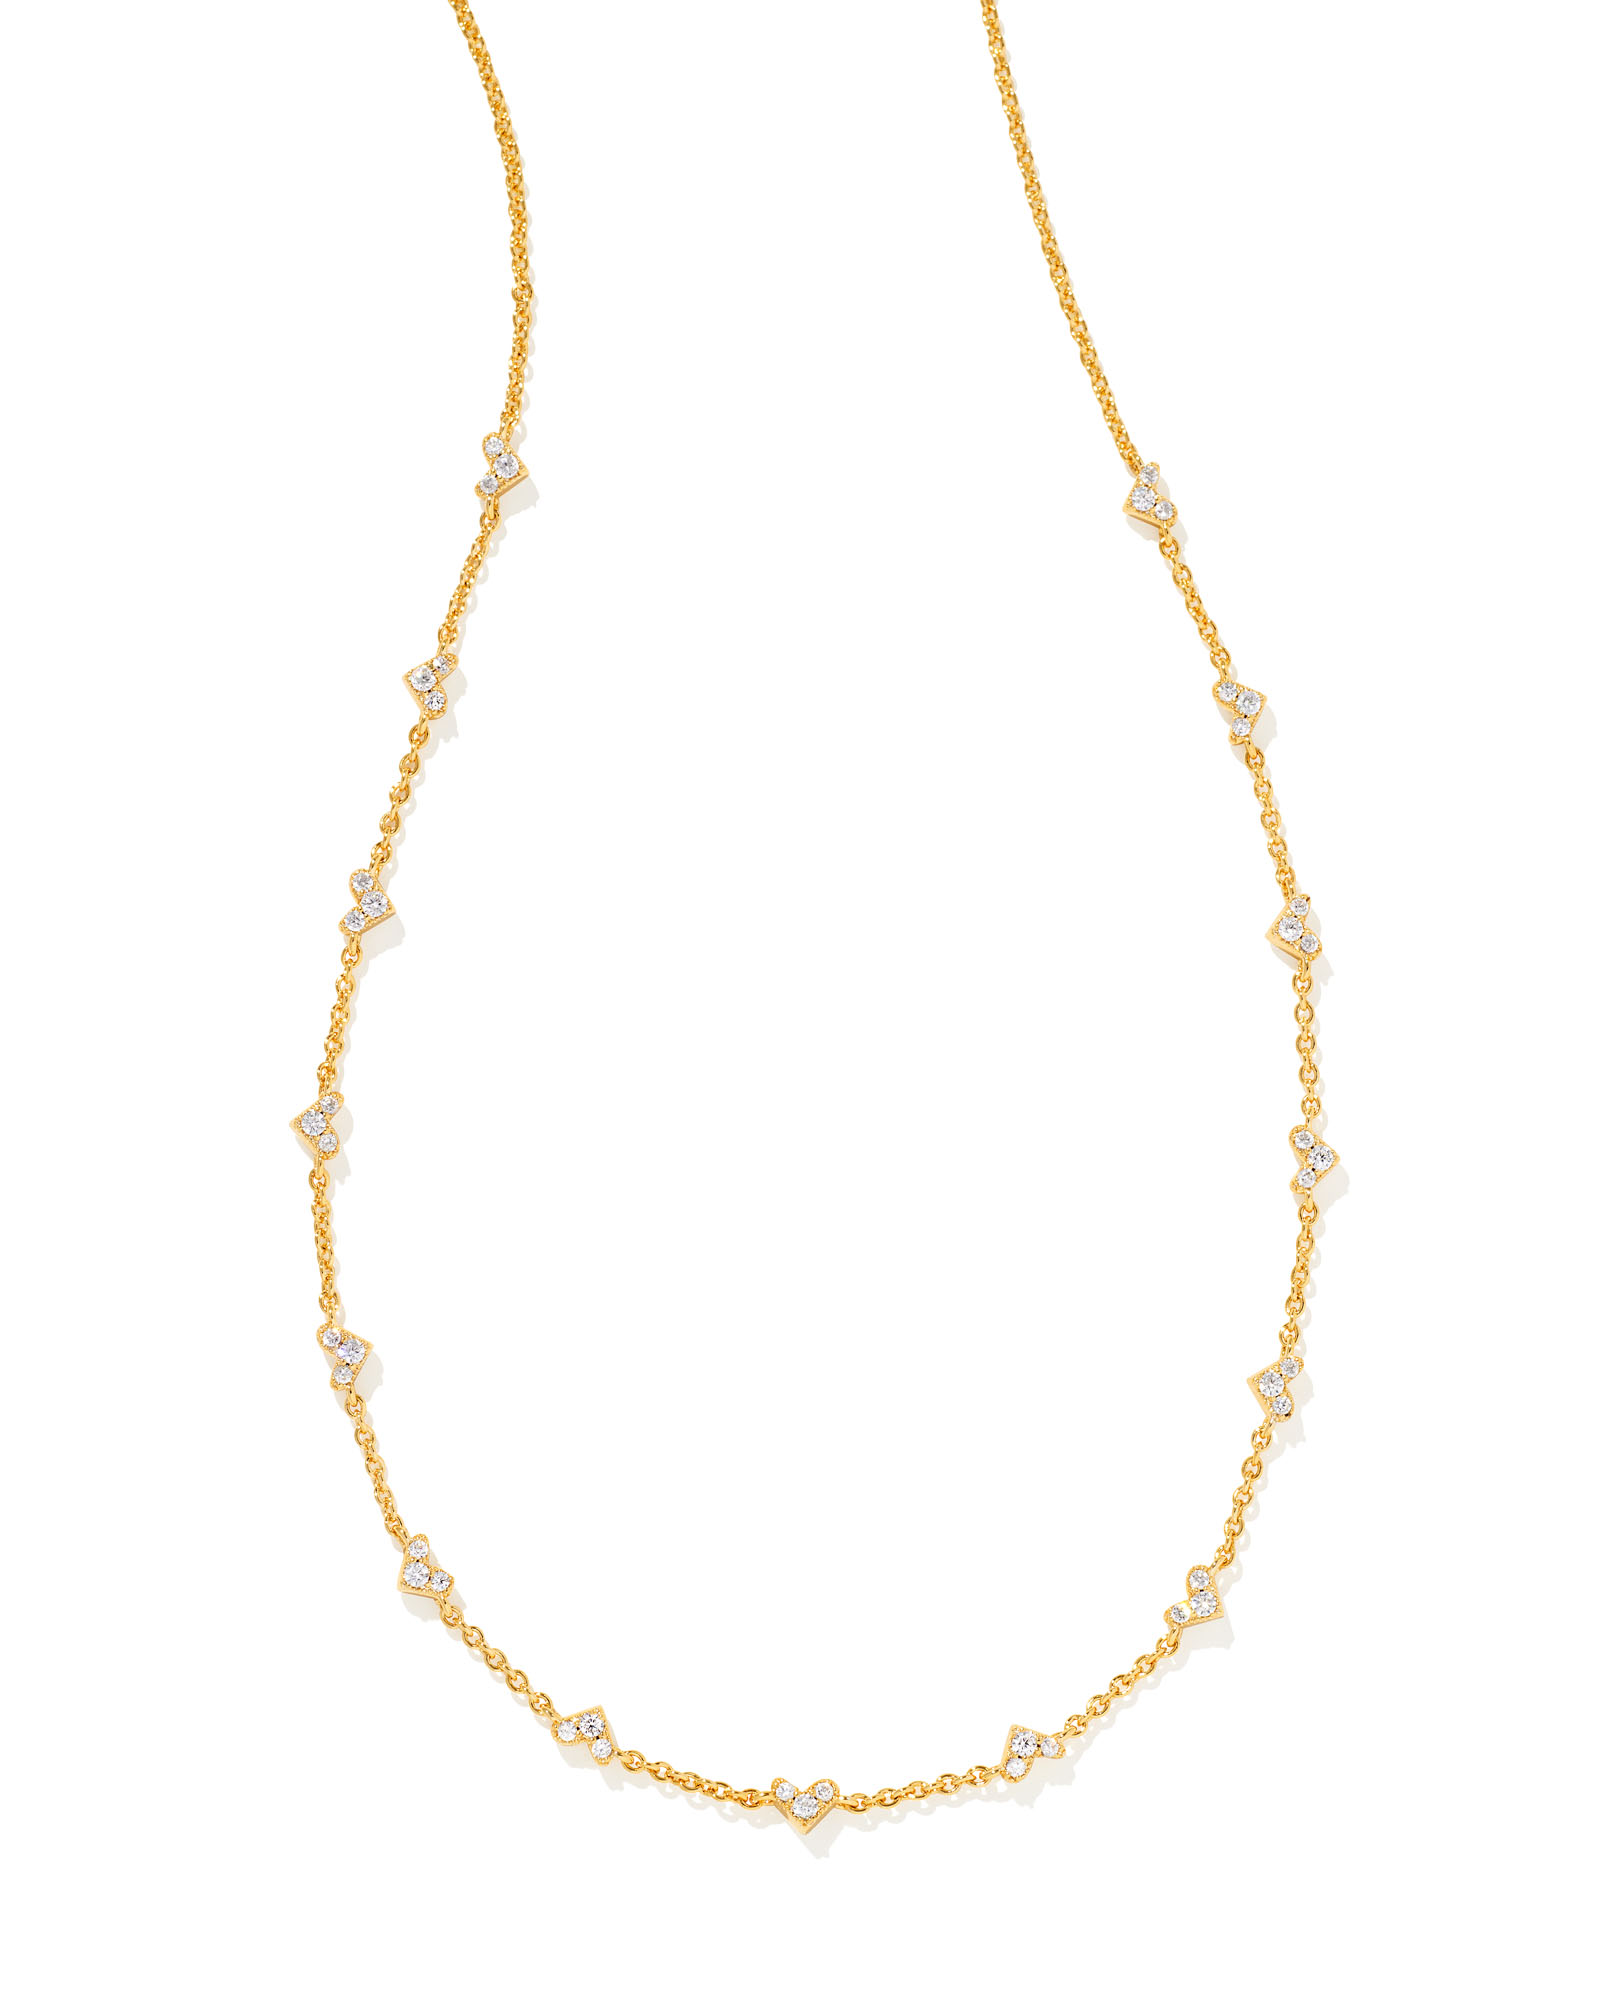 Kendra Scott Penny Heart Multi Strand Necklace in Ivory Mother-of-Pearl |  REEDS Jewelers